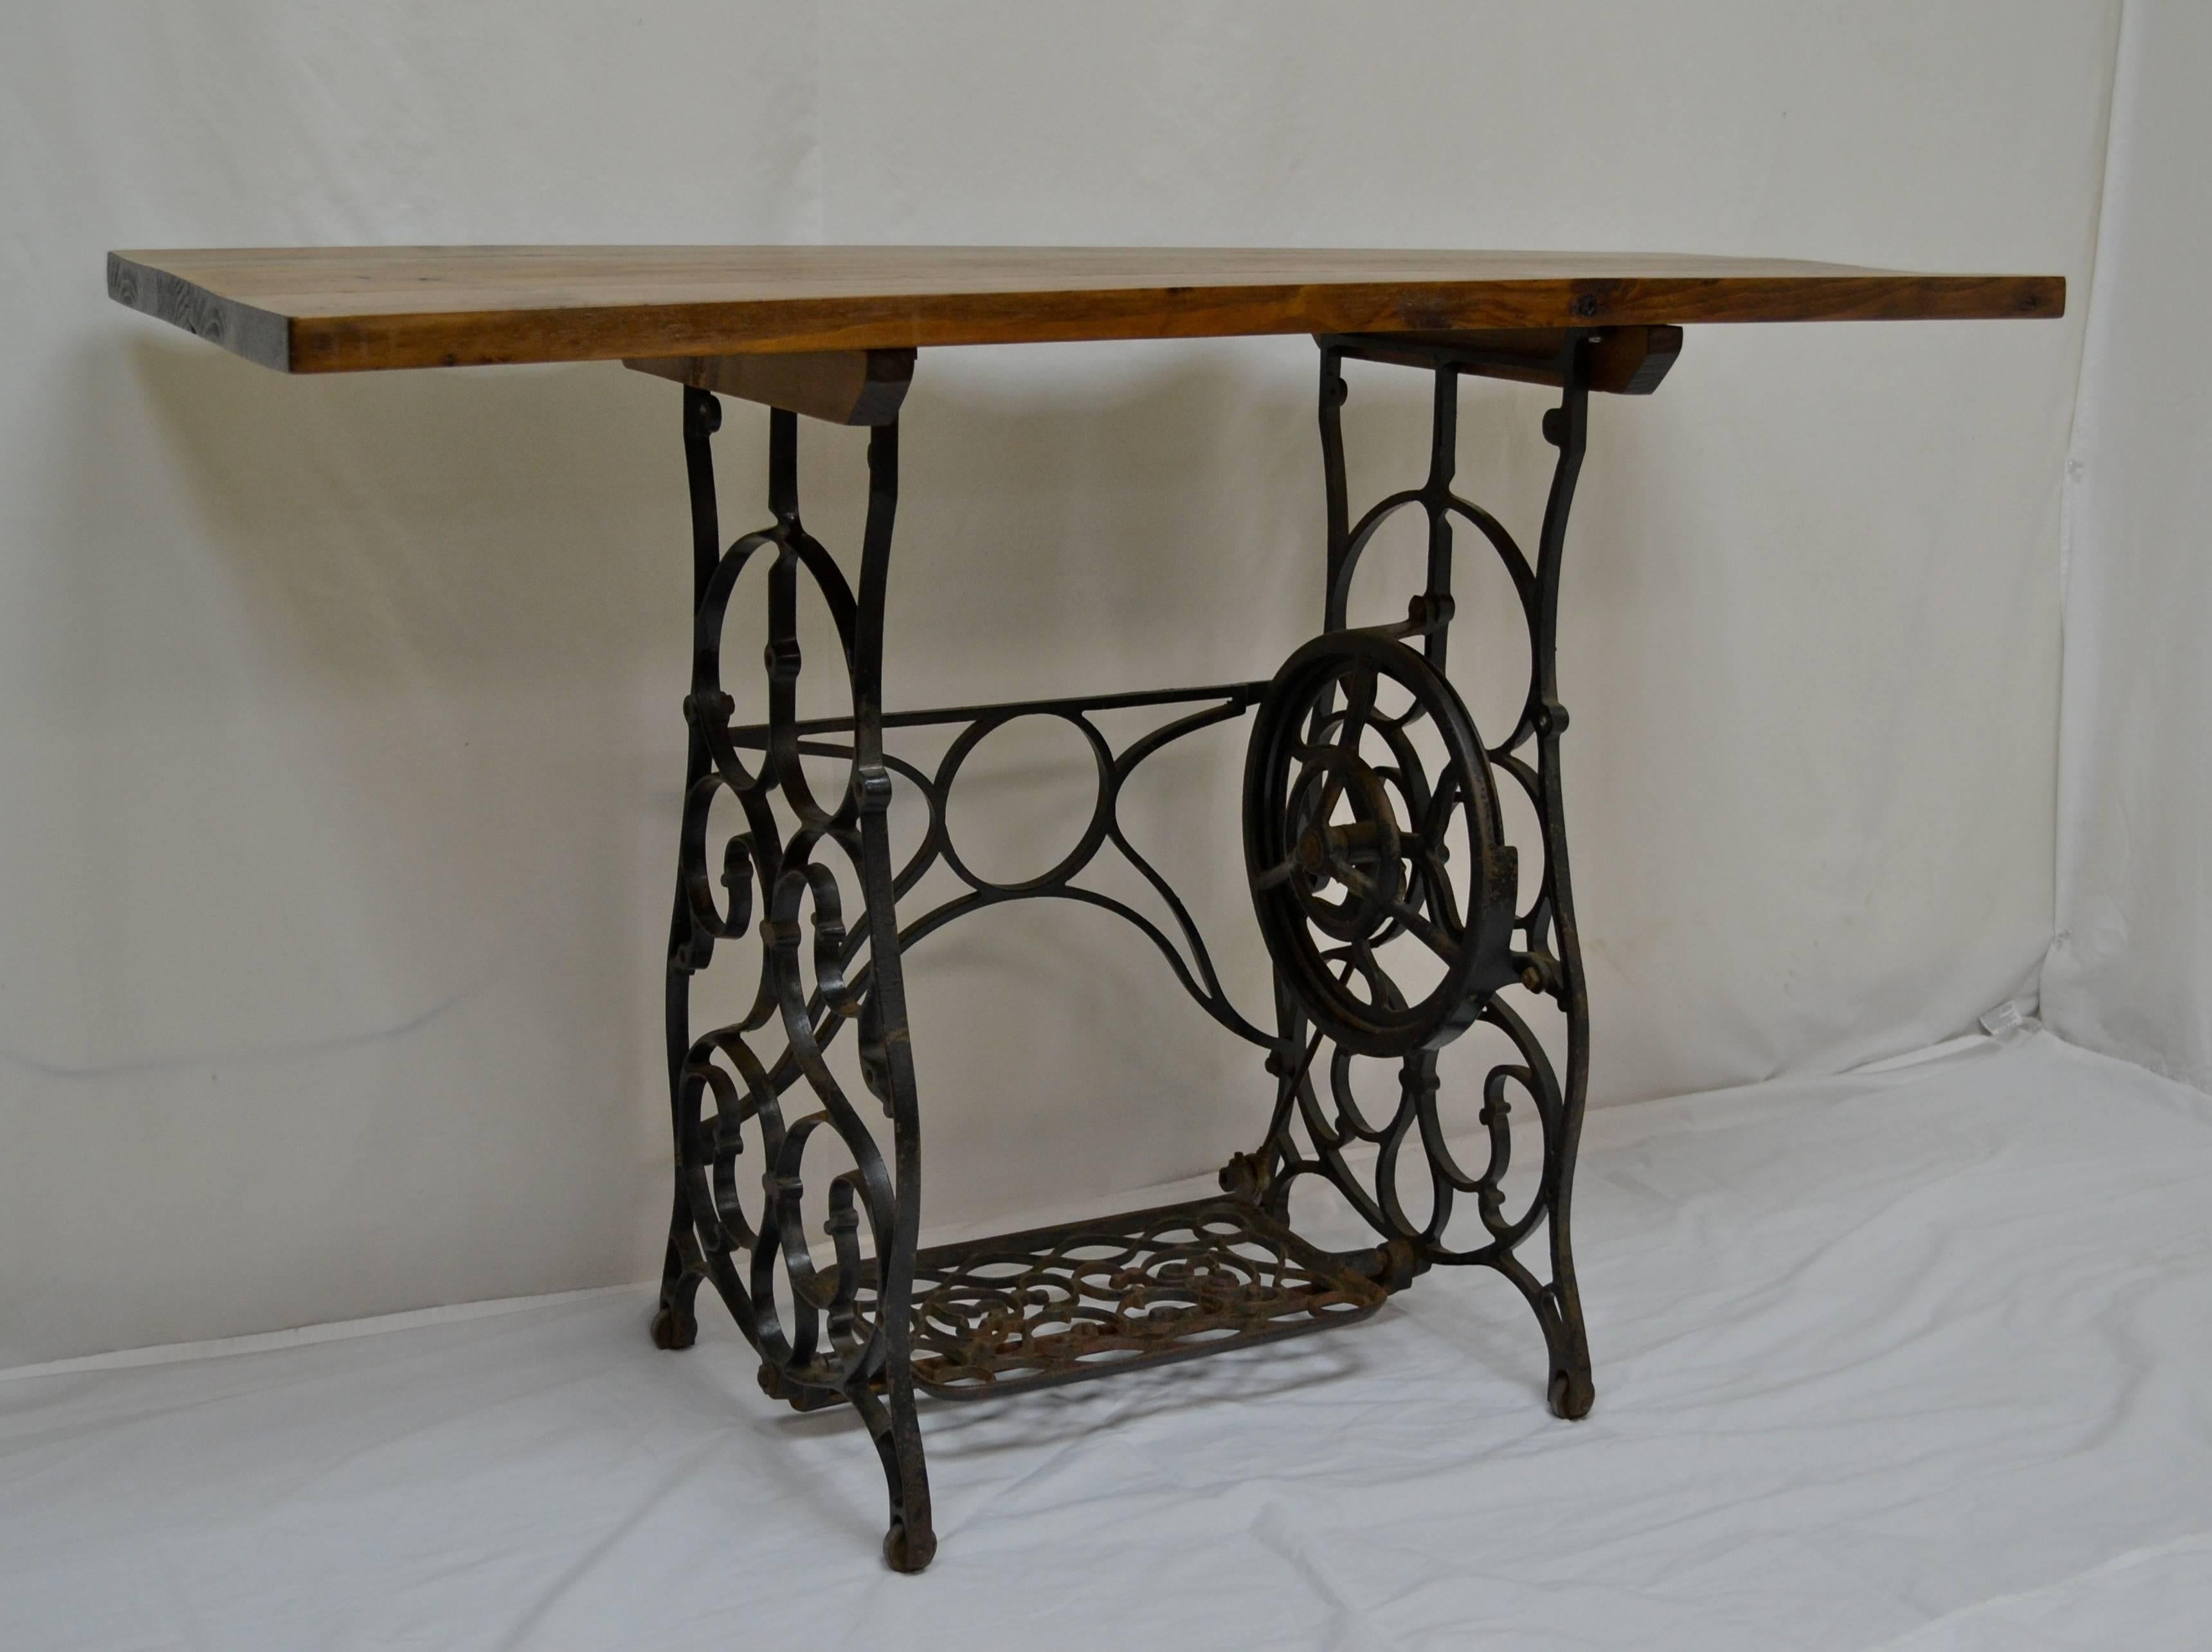 table made from old sewing machine base